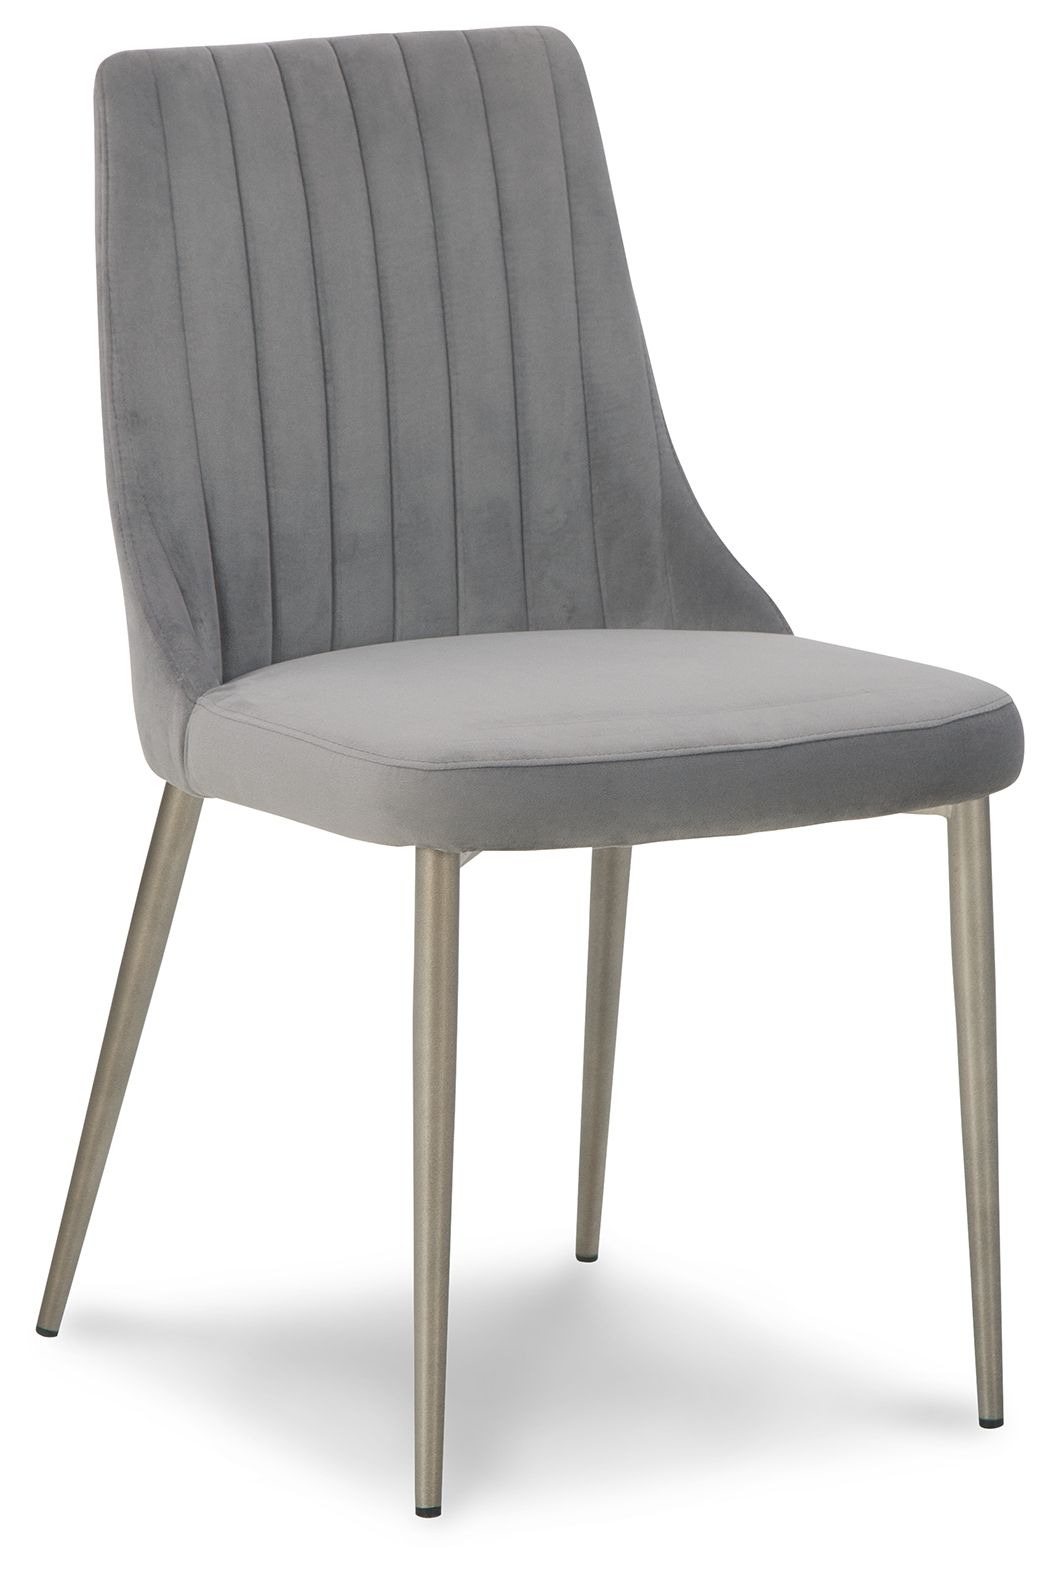 Barchoni - Gray - Dining Uph Side Chair (Set of 2) - Tony's Home Furnishings